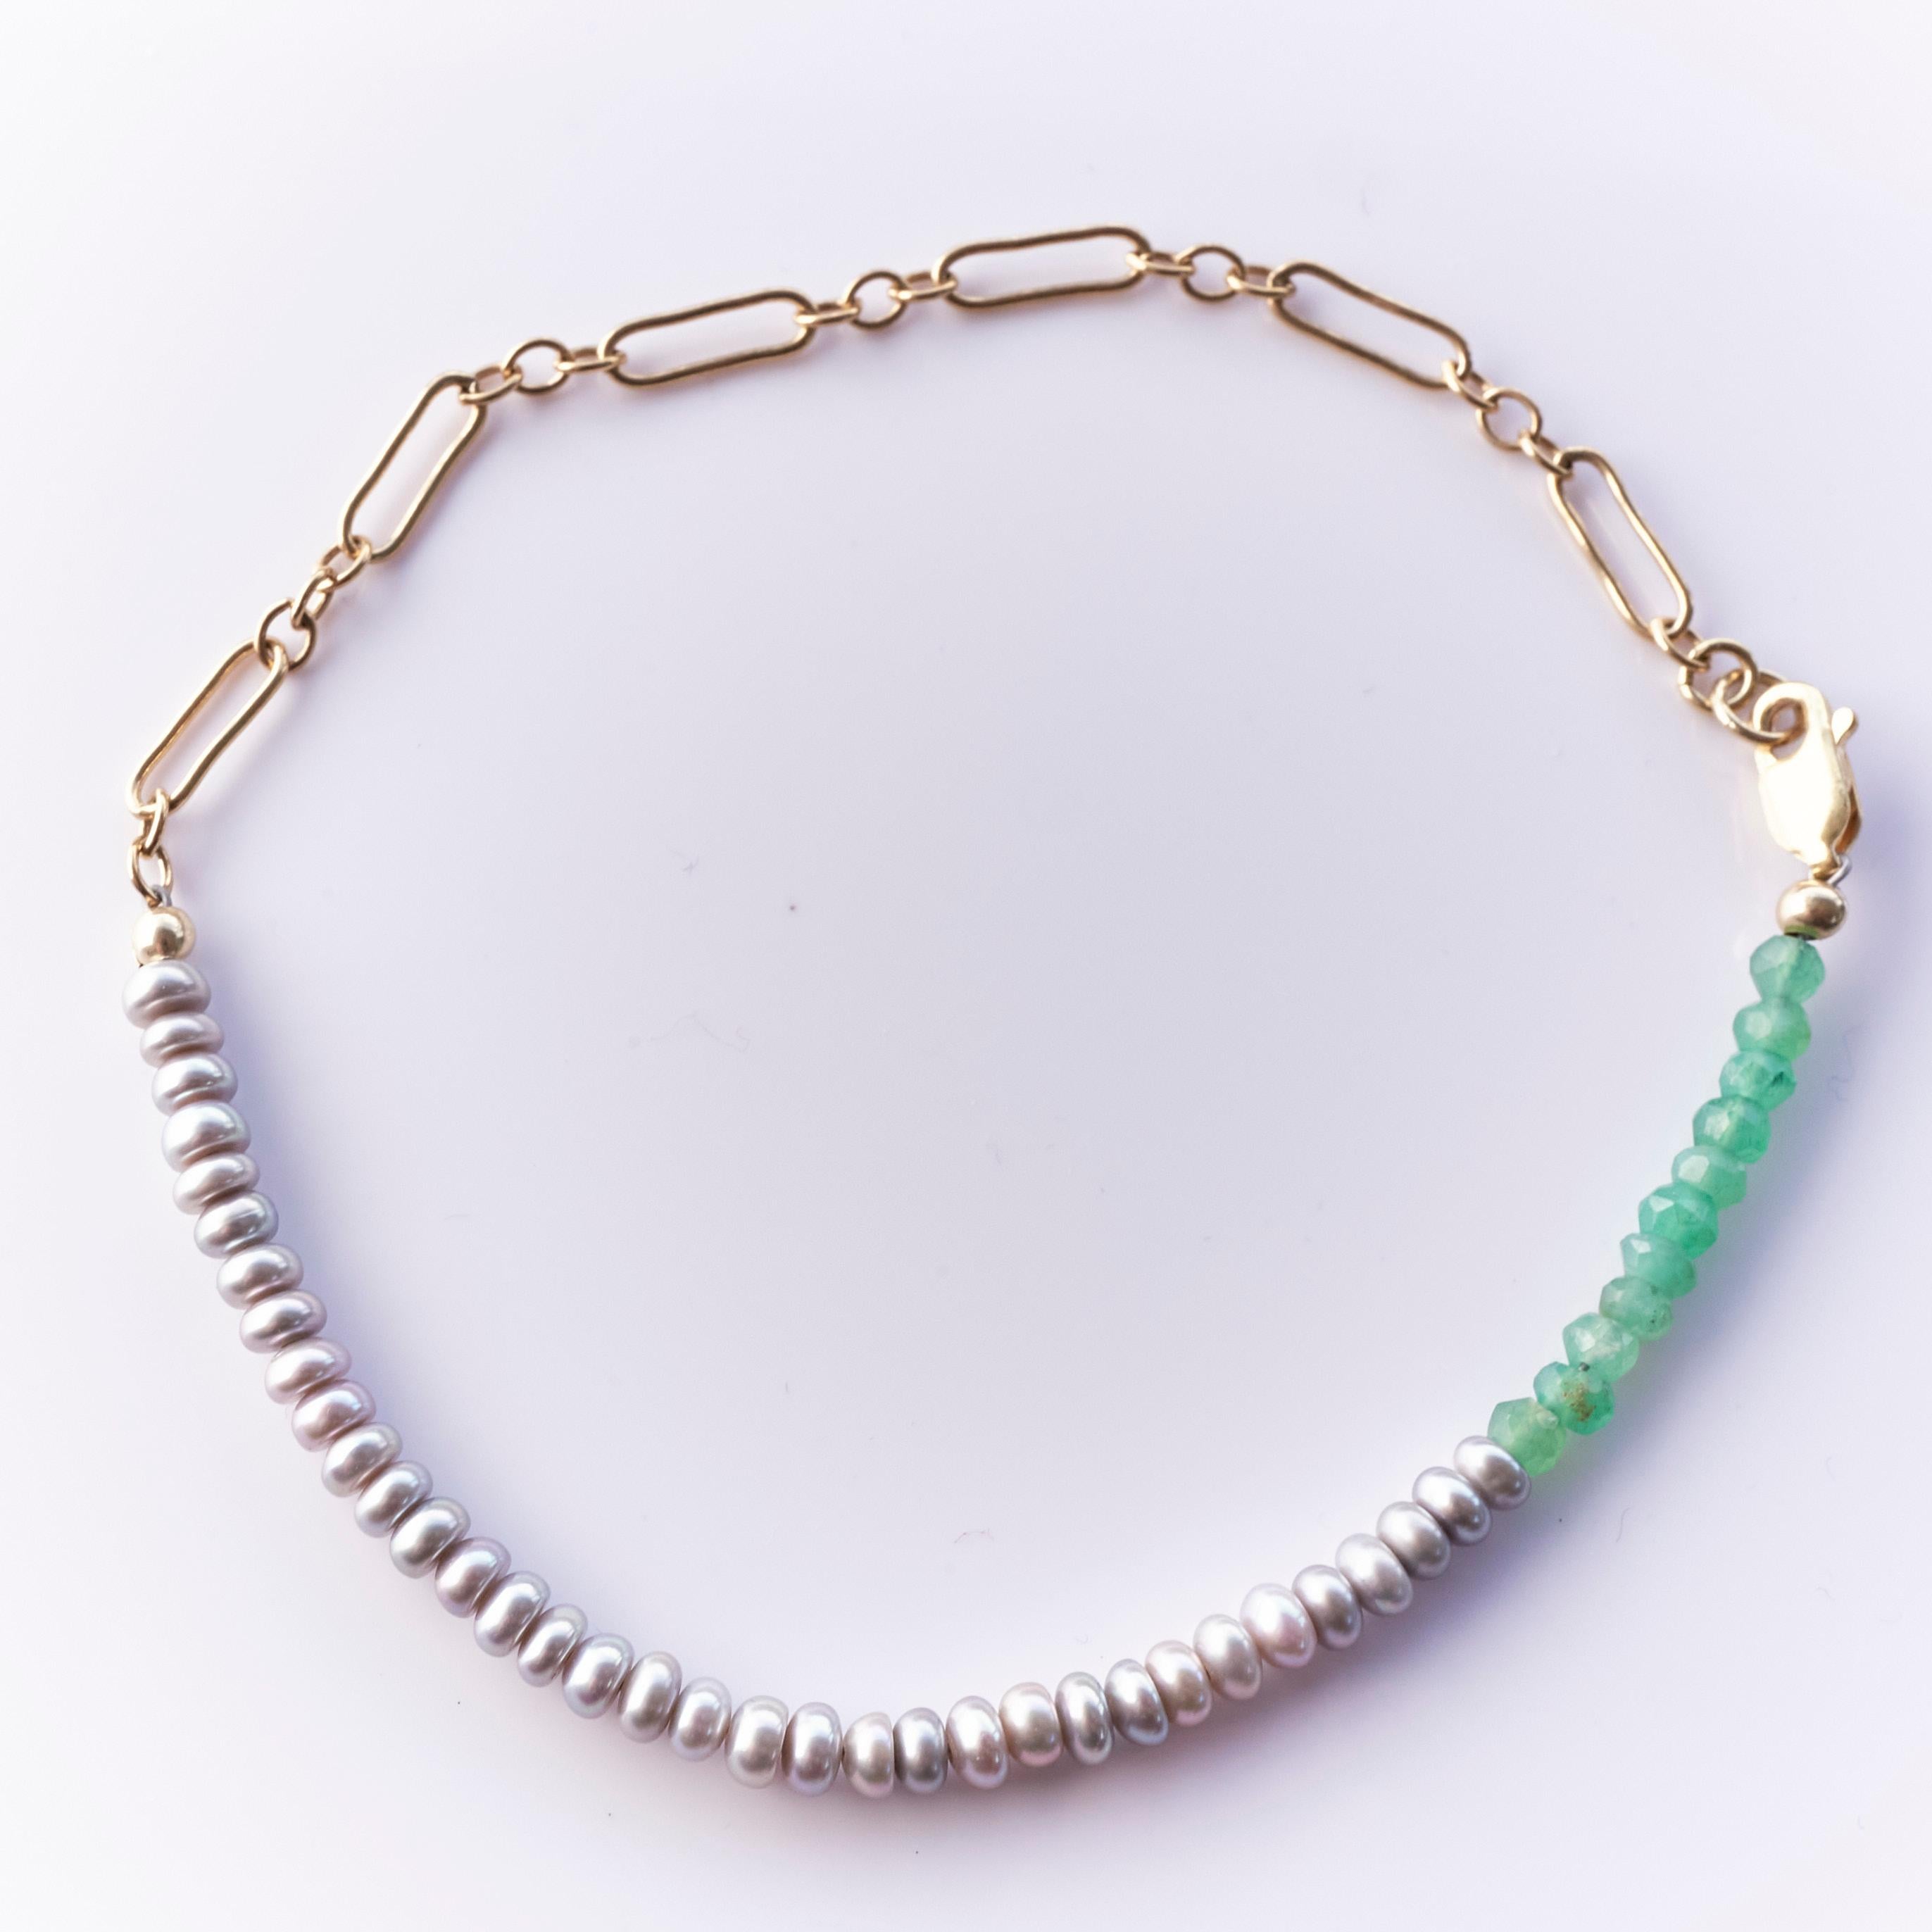 Pearl Chrysoprase Bead Bracelet Gold Filled Chain J Dauphin In New Condition For Sale In Los Angeles, CA